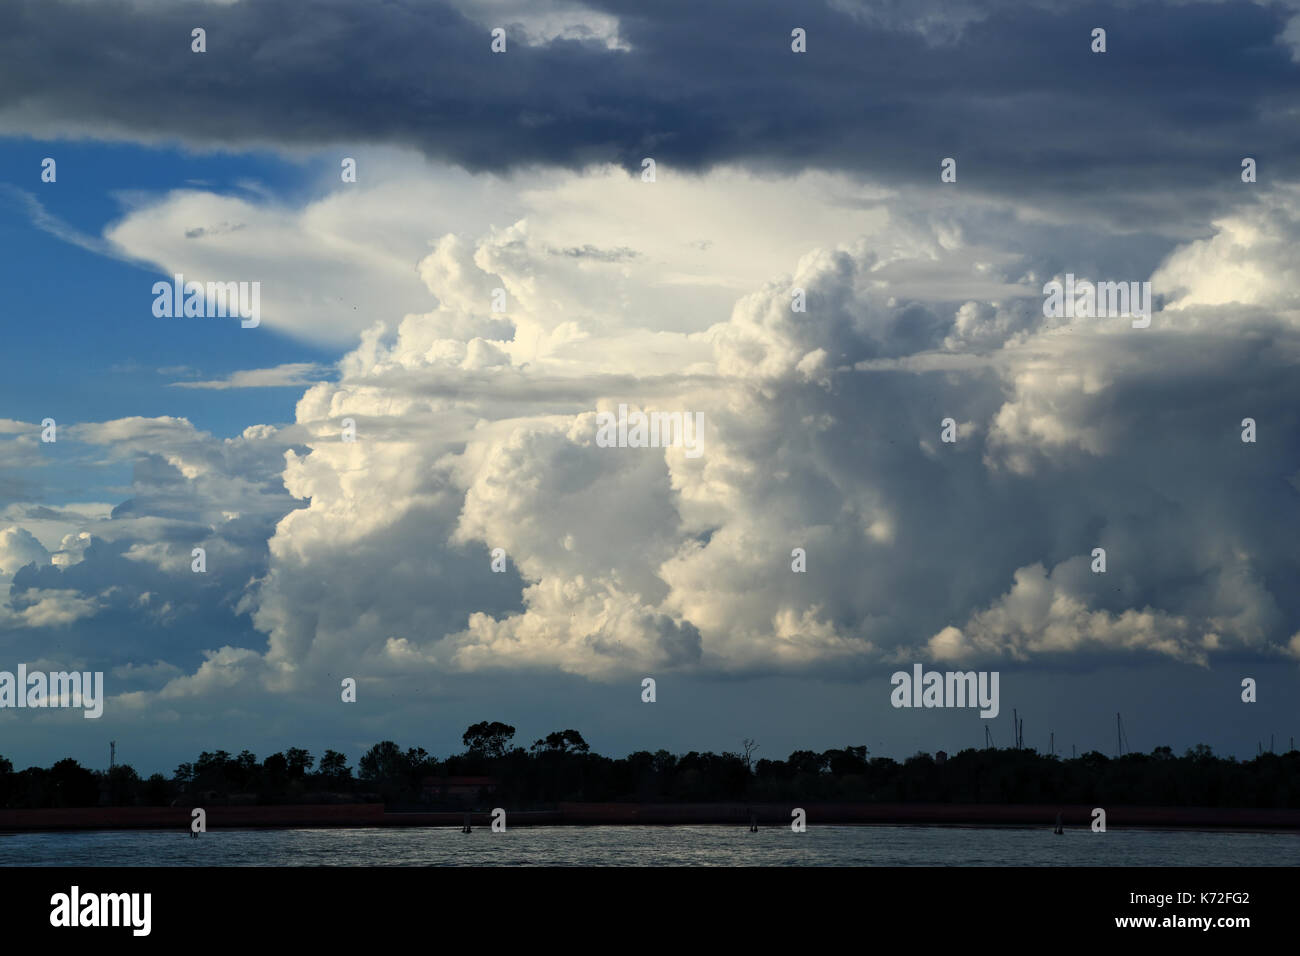 Dramatic thunderstorm cloud formation Stock Photo